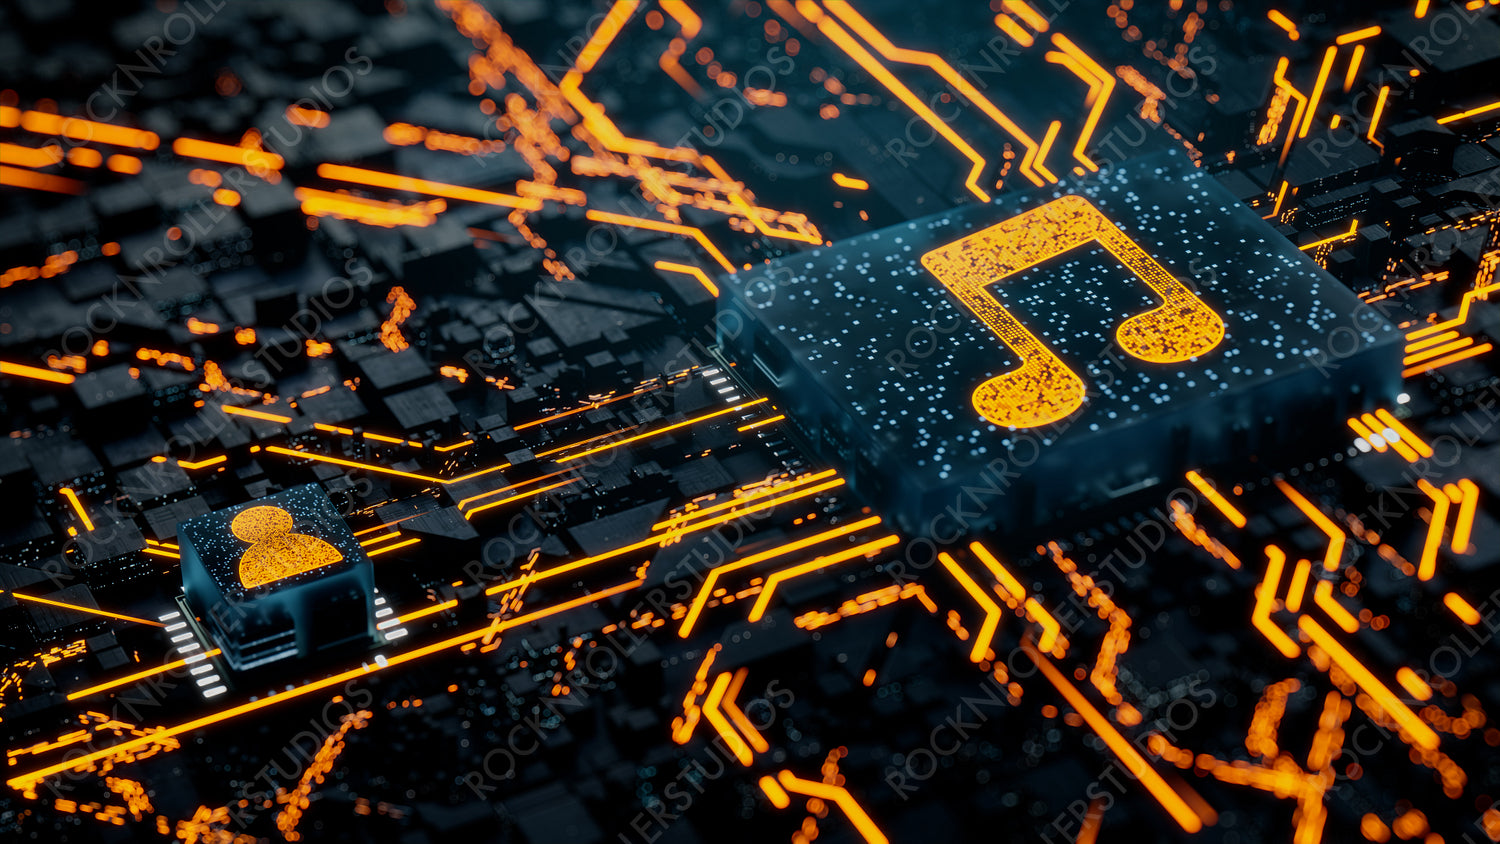 Audio Technology Concept with music symbol on a Microchip. Orange Neon Data flows between the CPU and the User across a Futuristic Motherboard. 3D render.